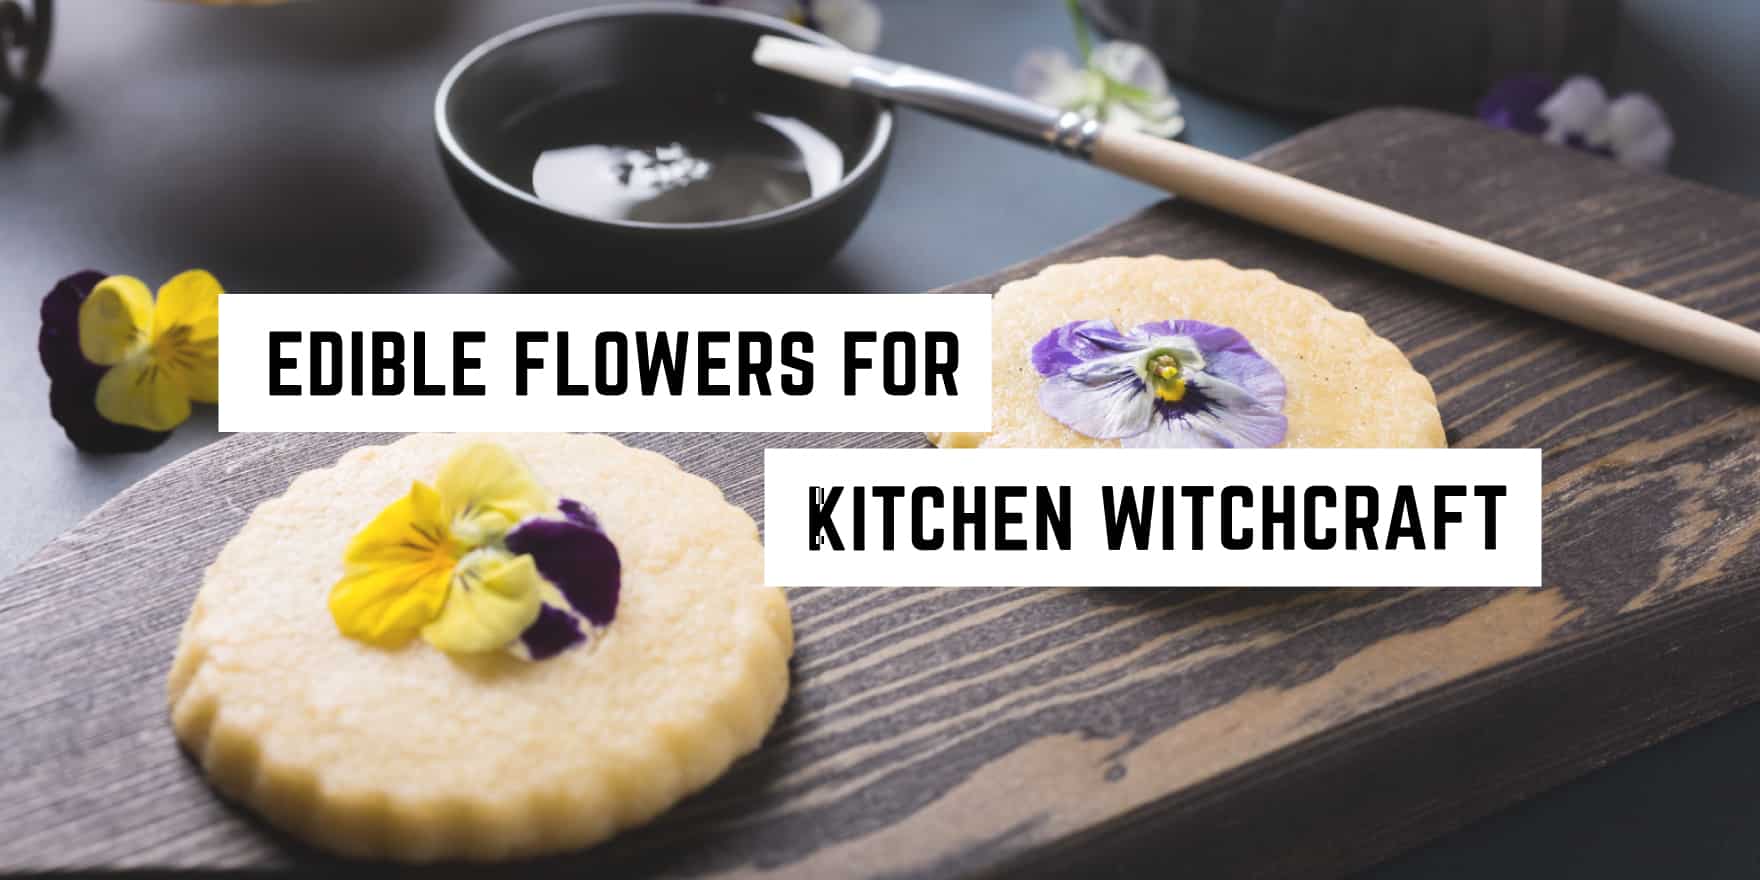 Edible Flowers for Kitchen Witchcraft